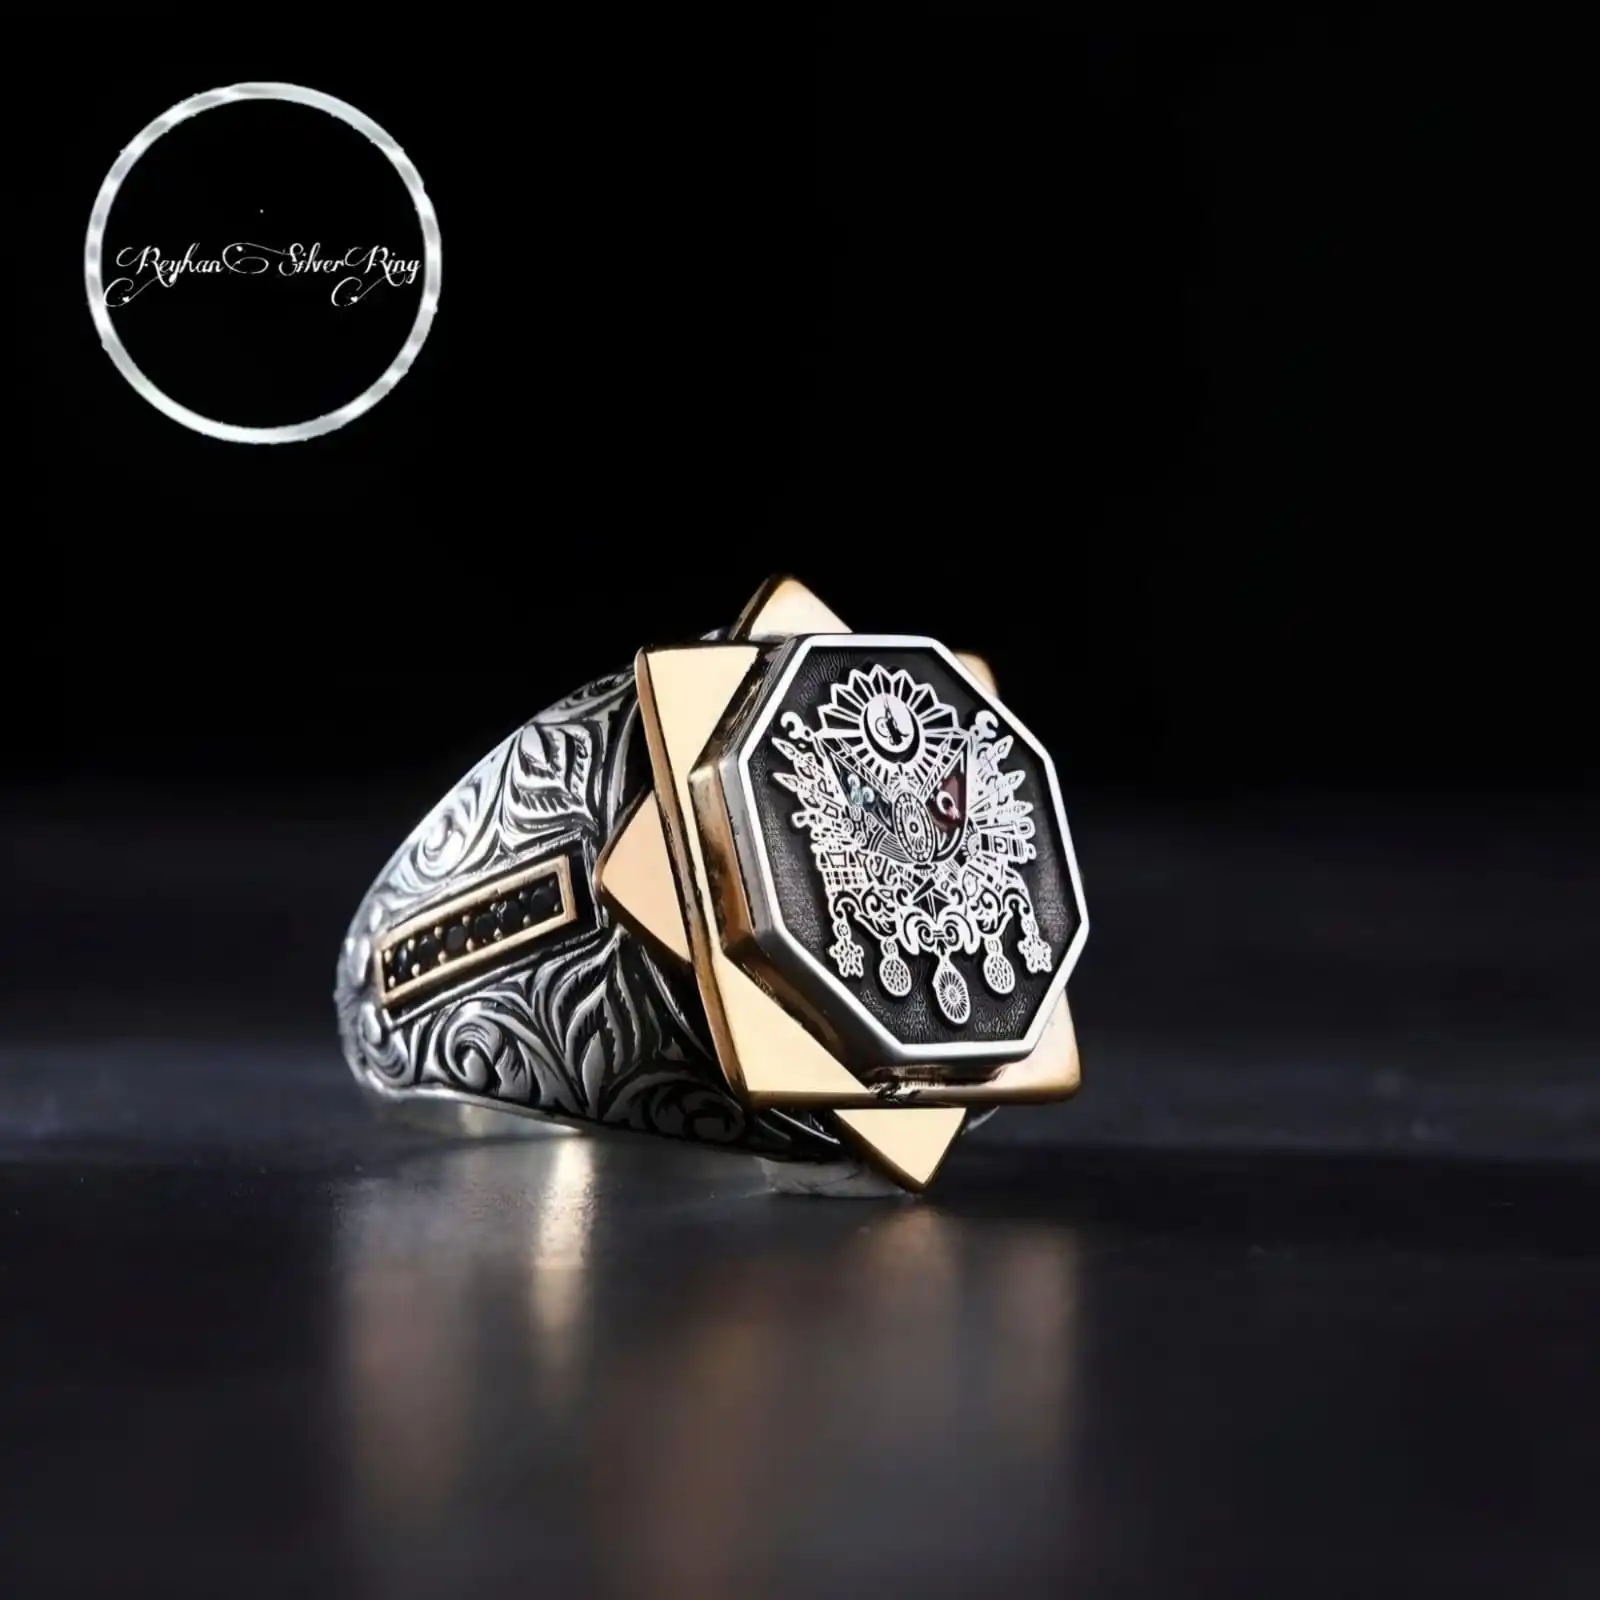 

Ottoman Flag Silver Men's Ring, Handmade Unique Ottoman Jewelry with Engraving Pattern, Turkish Gift for Man, Adjustable Gifts